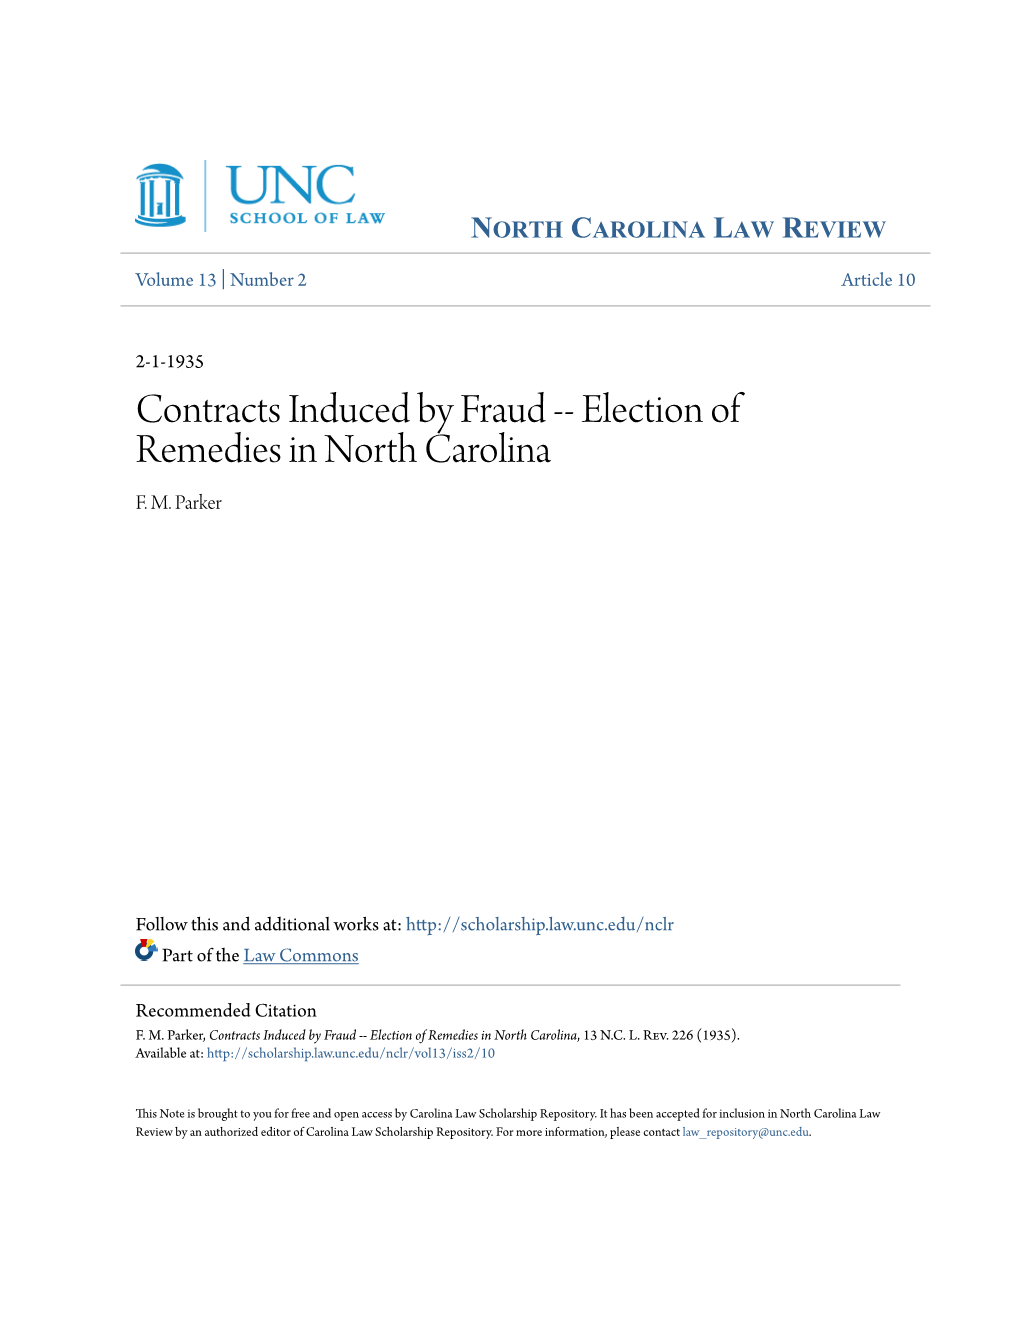 Contracts Induced by Fraud -- Election of Remedies in North Carolina F